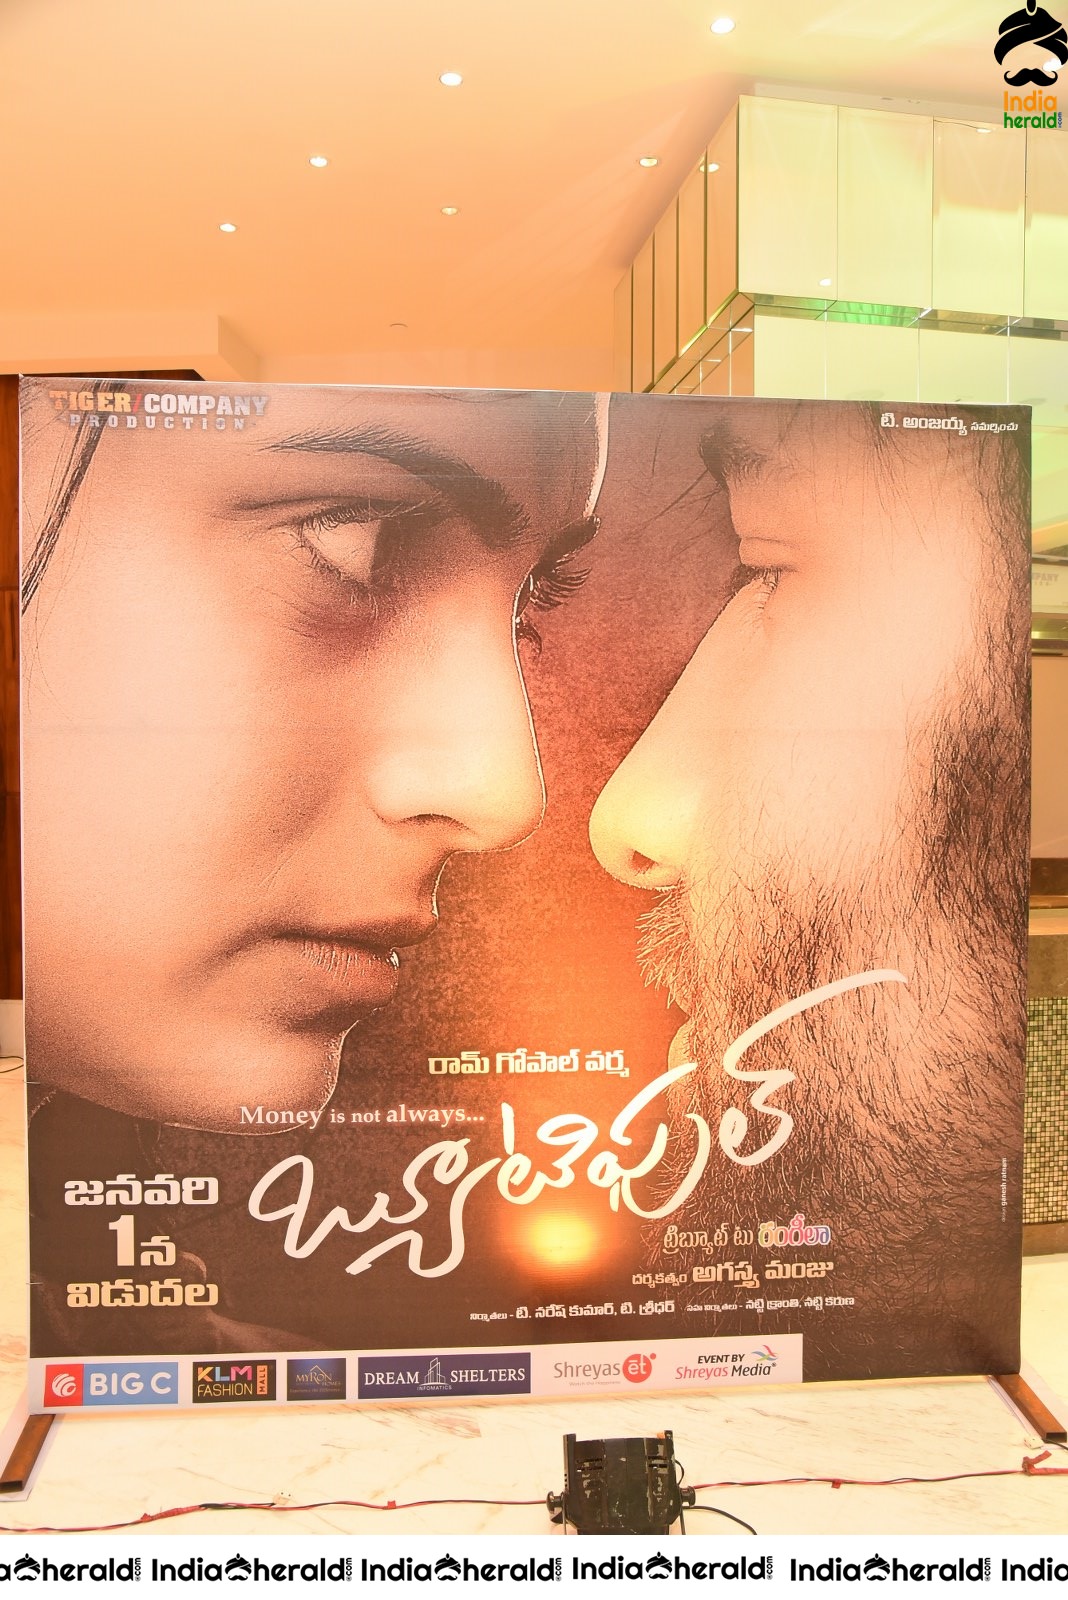 Hoardings placed at Beautiful Movie Event